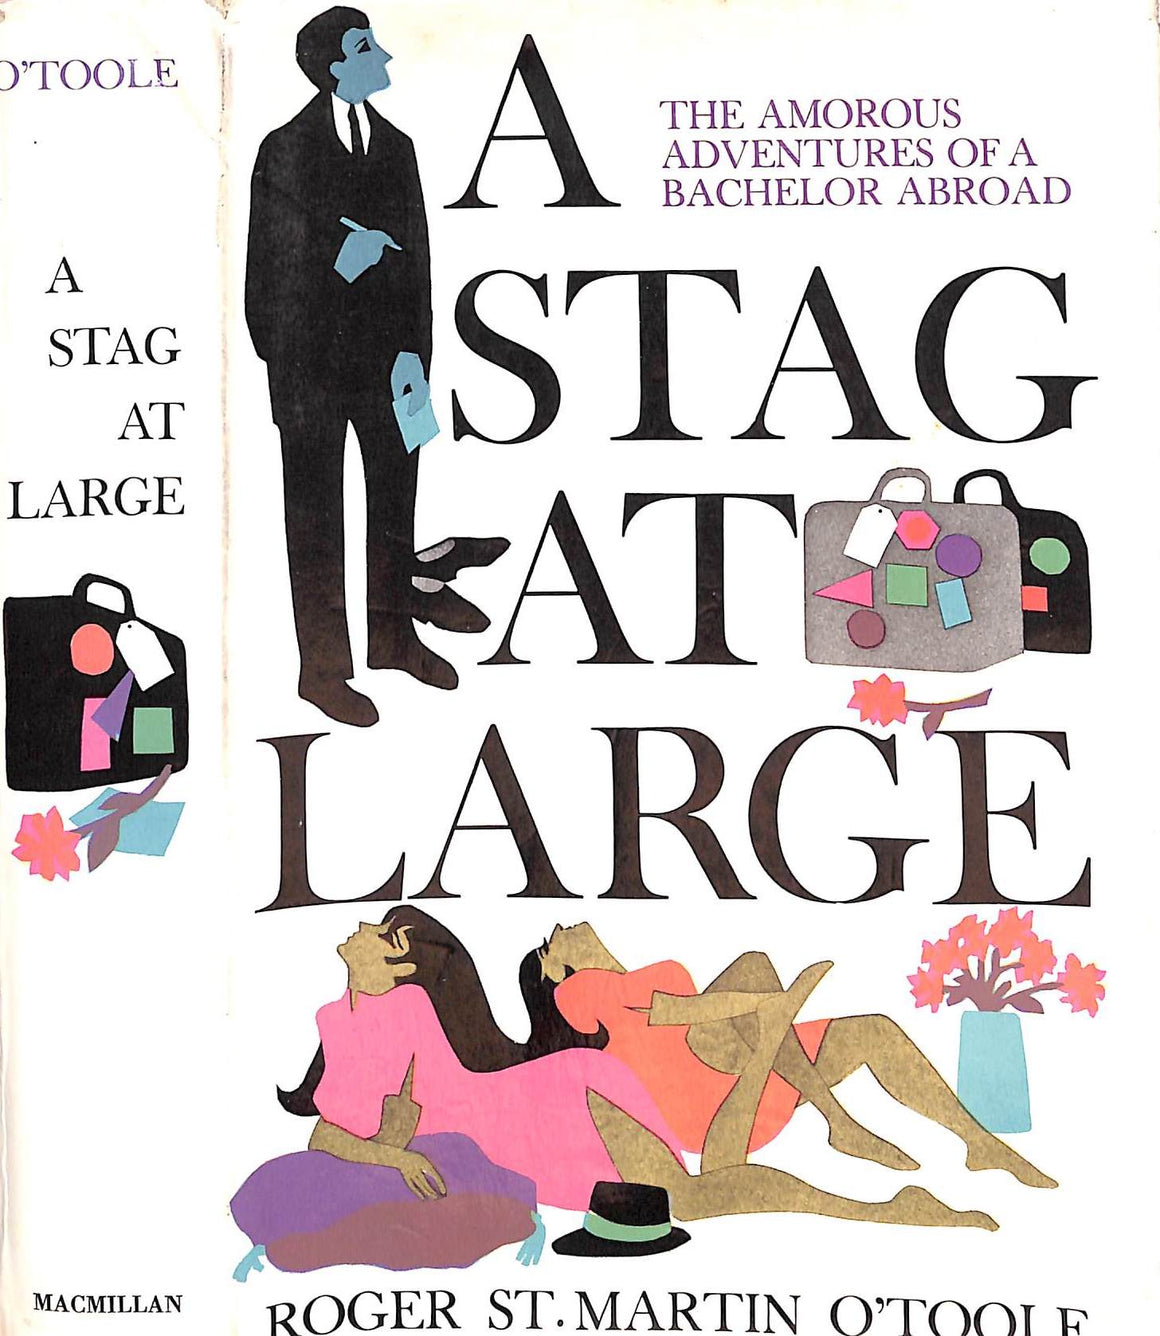 "A Stag At Large: Confessions Of A Bachelor Abroad" 1968 O'TOOLE, Roger St. Martin